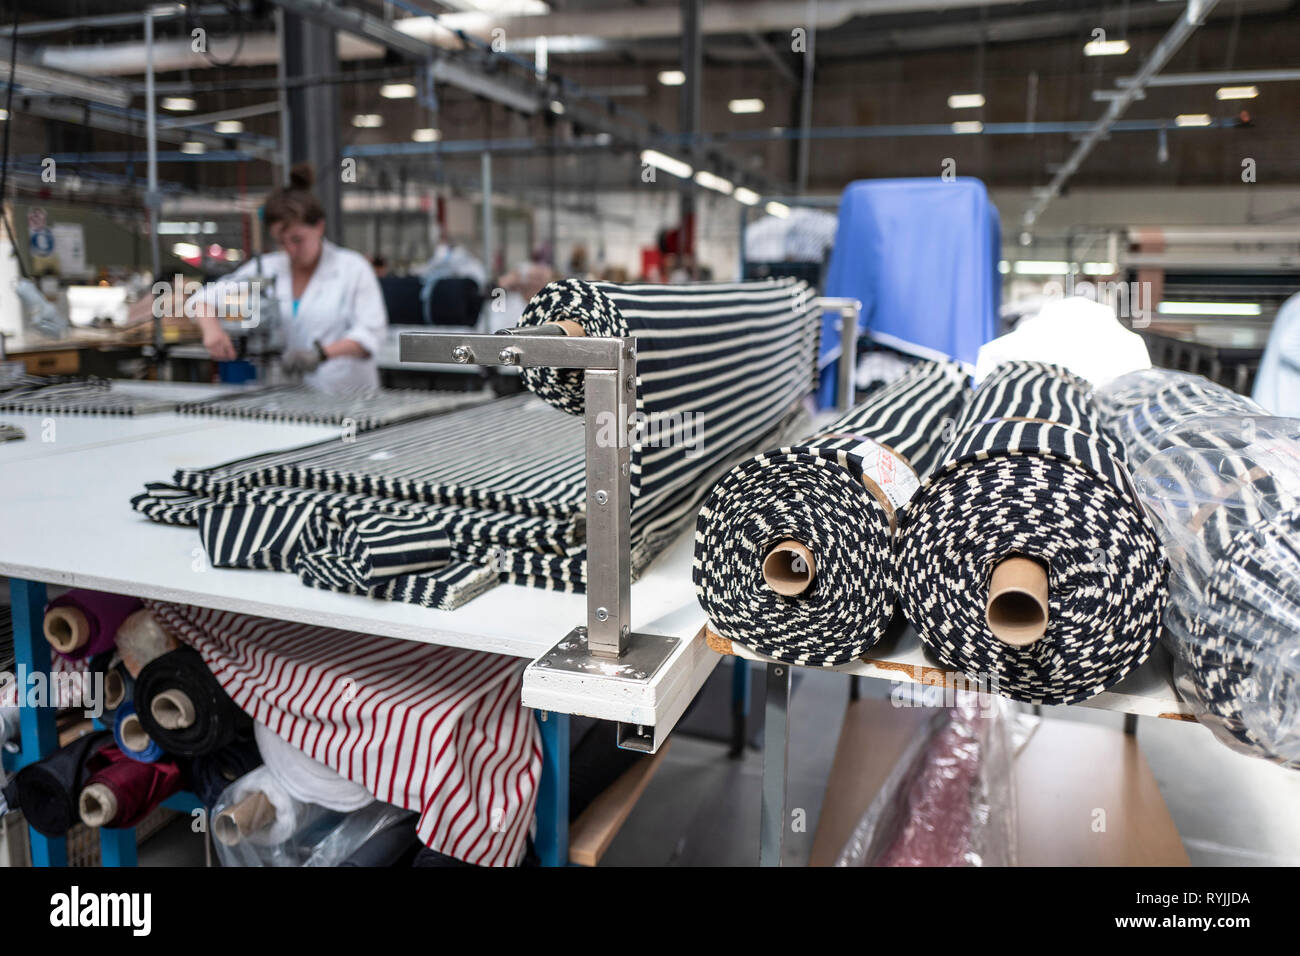 Quimper (Brittany, north-western France): blue and white striped fabric in  the Armor Lux garment production workshop *** Local Caption *** Stock Photo  - Alamy